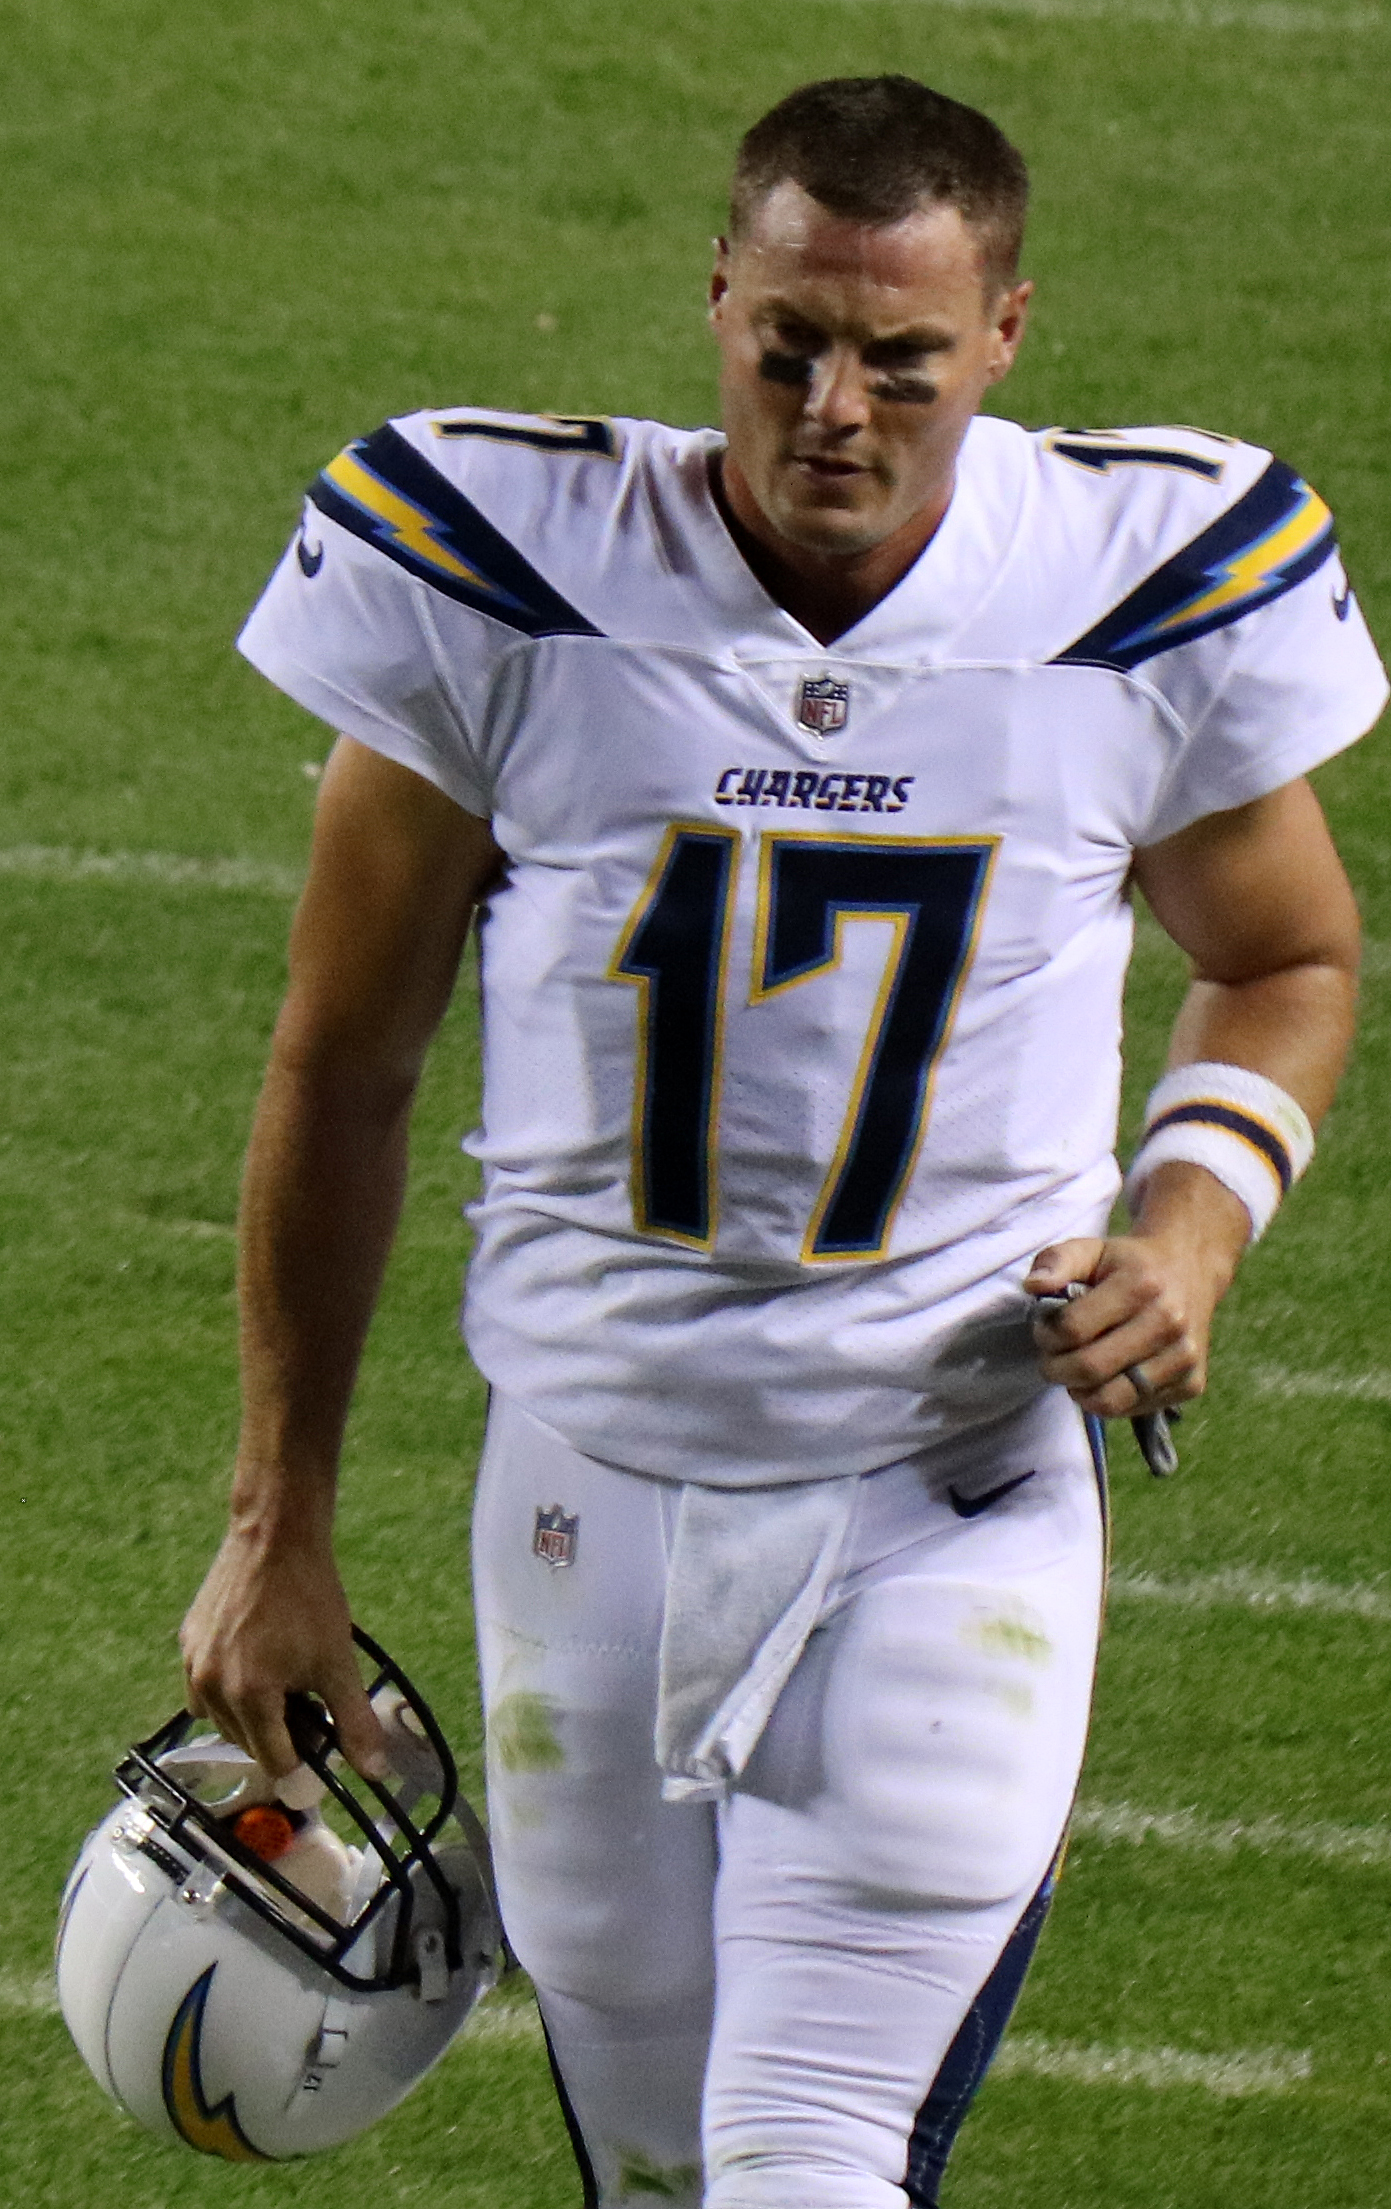 Rivers, Chargers roll over winless Dolphins